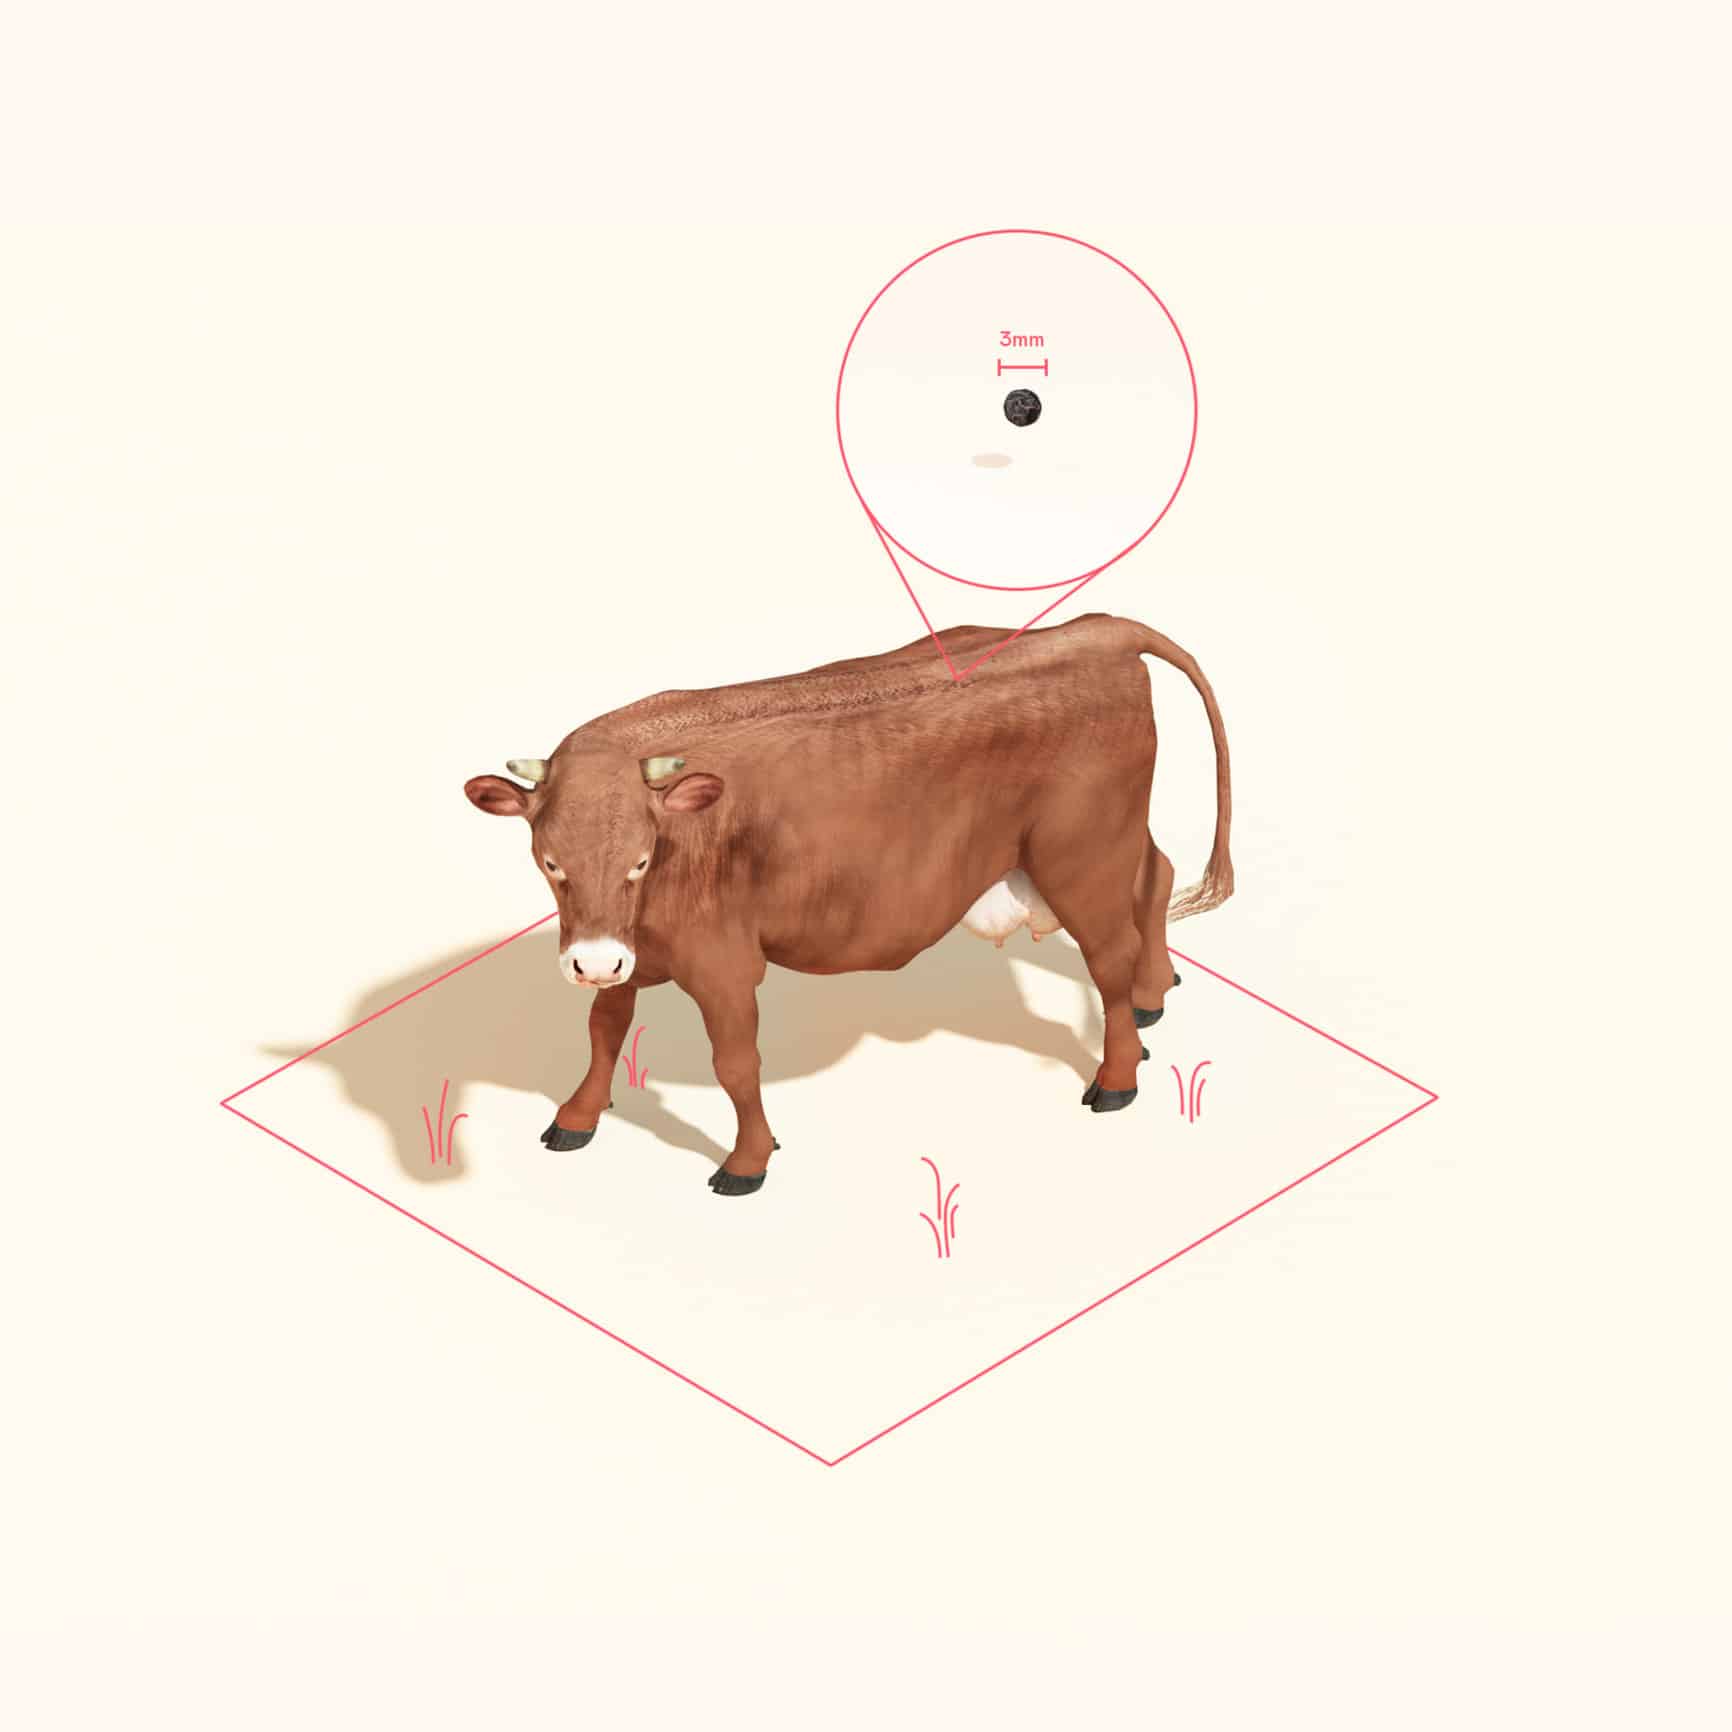 Lab-grown meat process